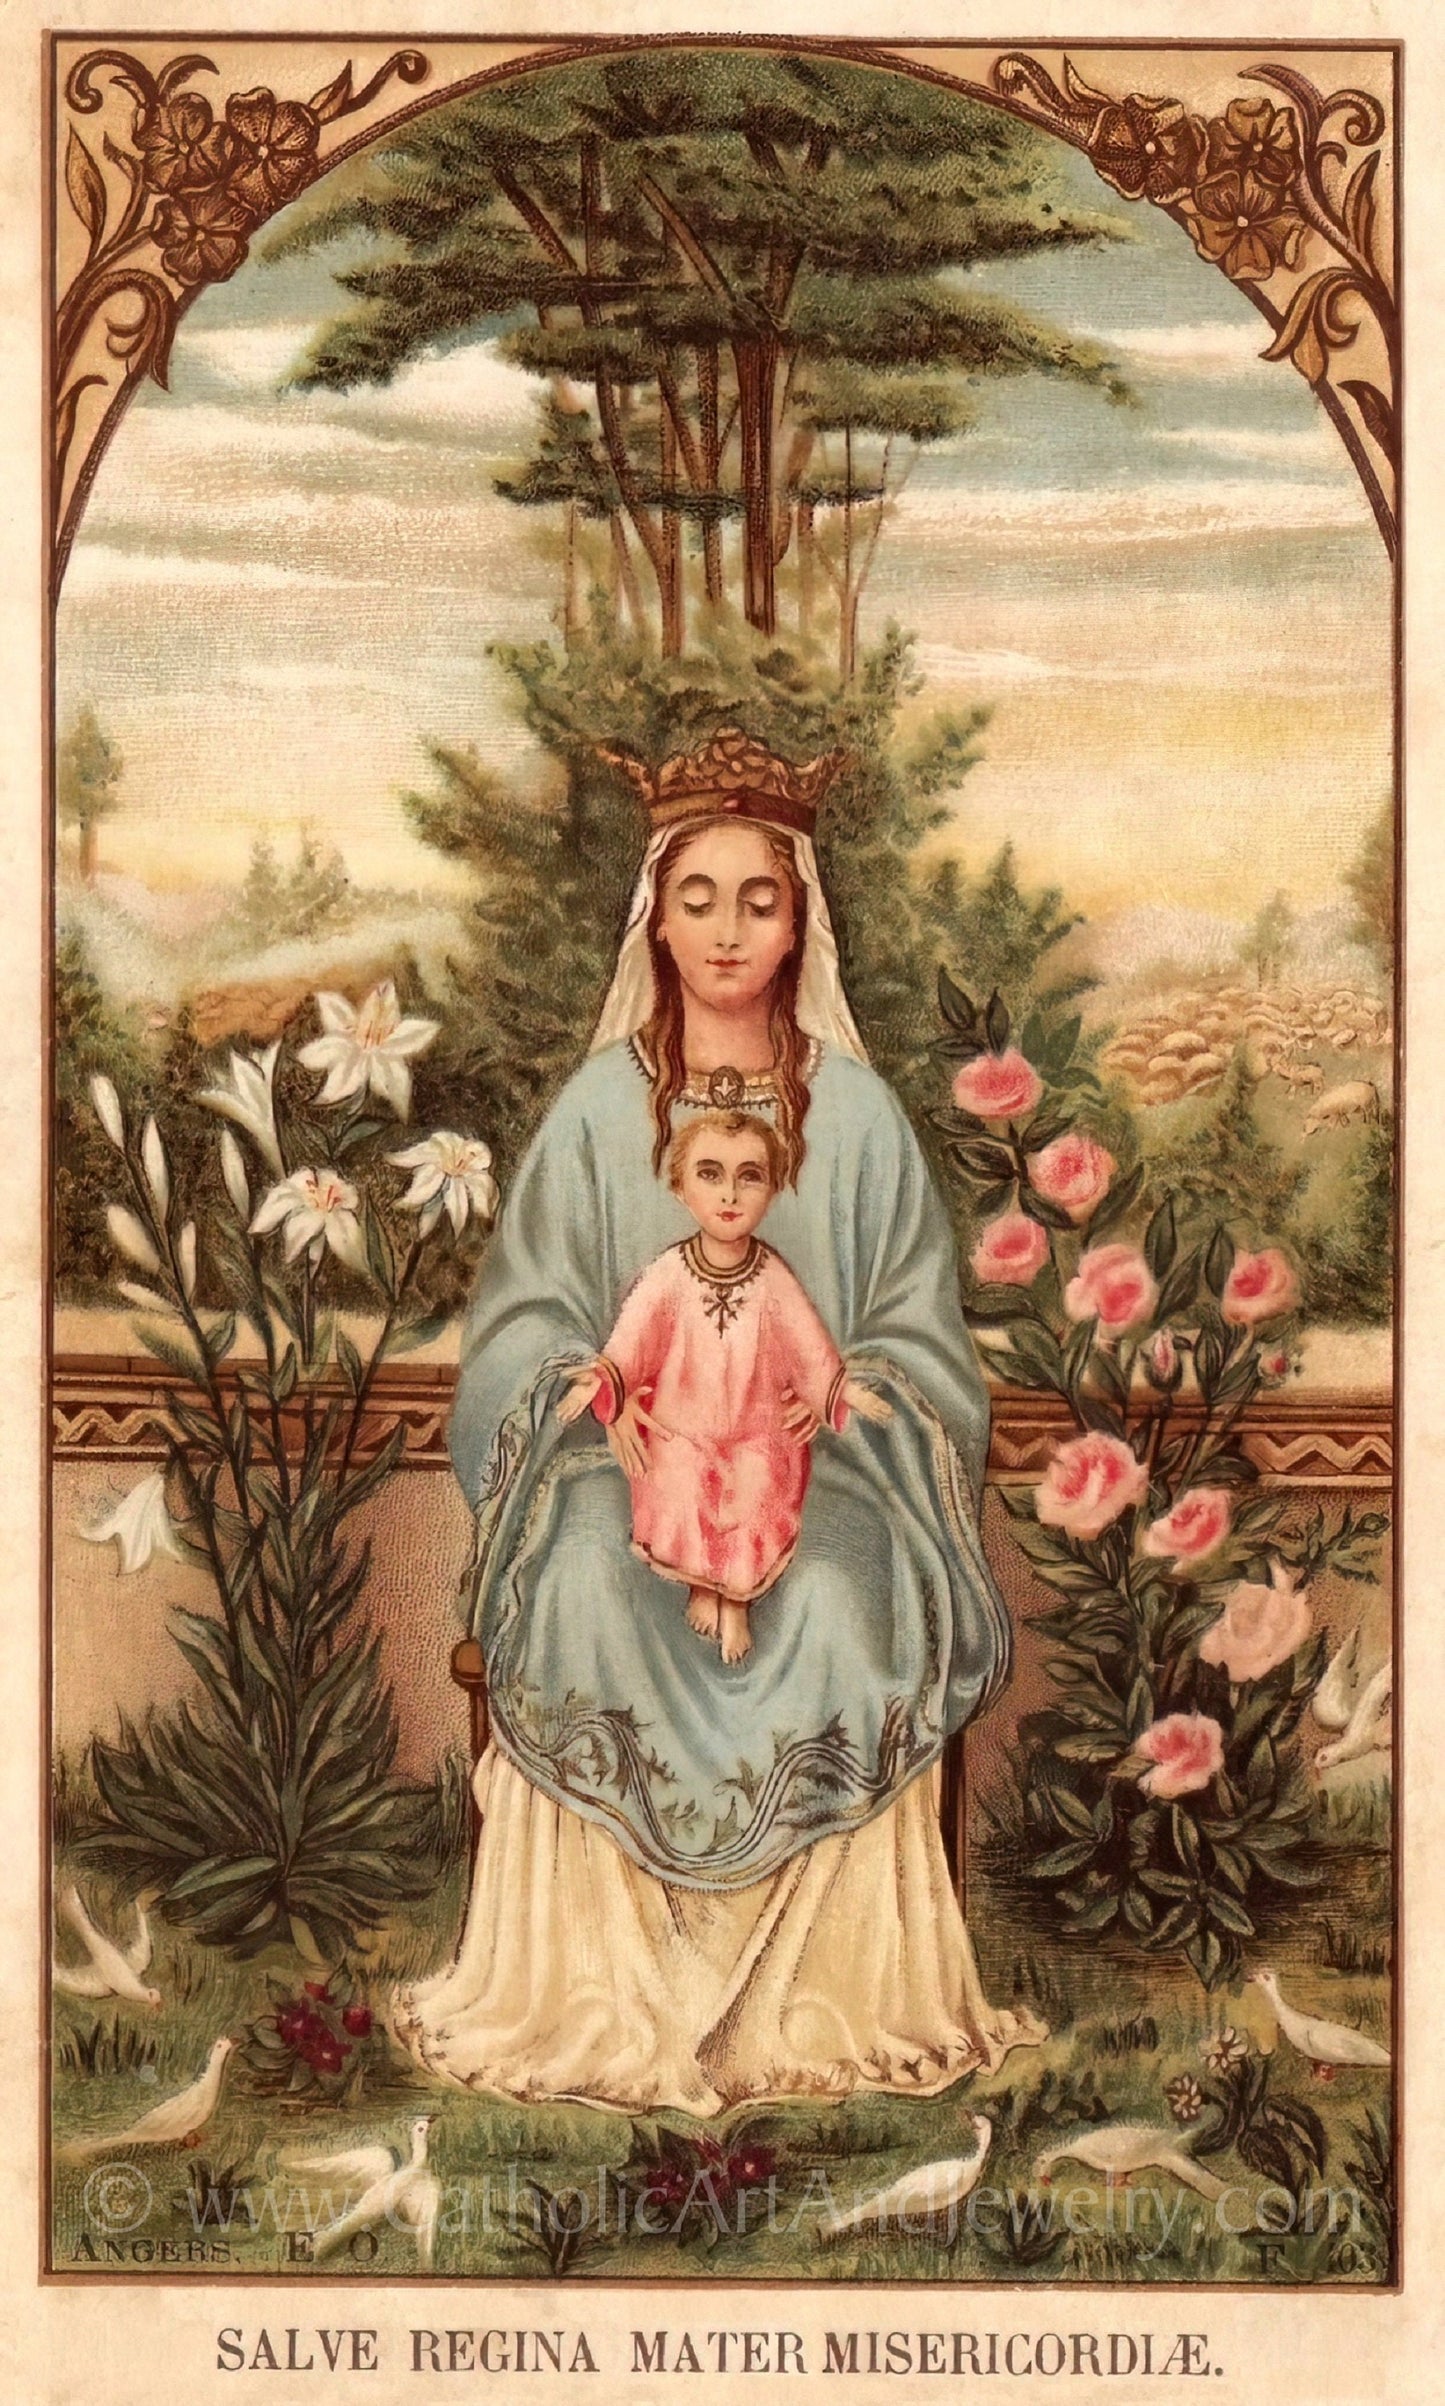 Hail Holy Queen – 4 sizes – based on a Vintage Holy Card